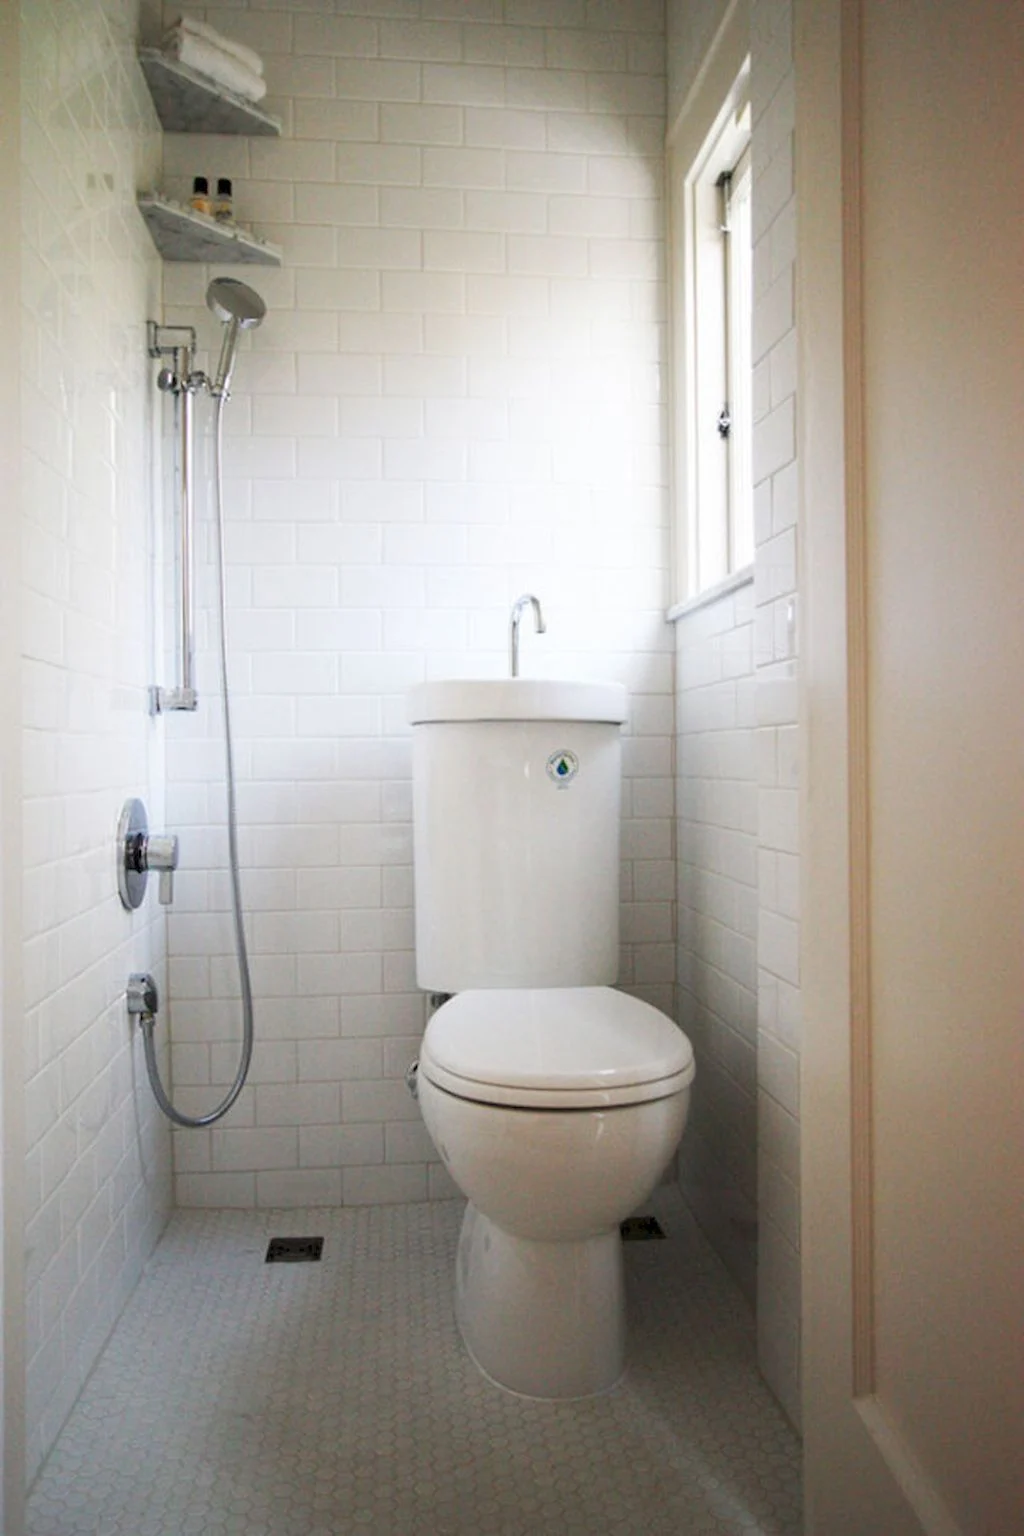 Compact Toilet/Sink Combo and a Shower